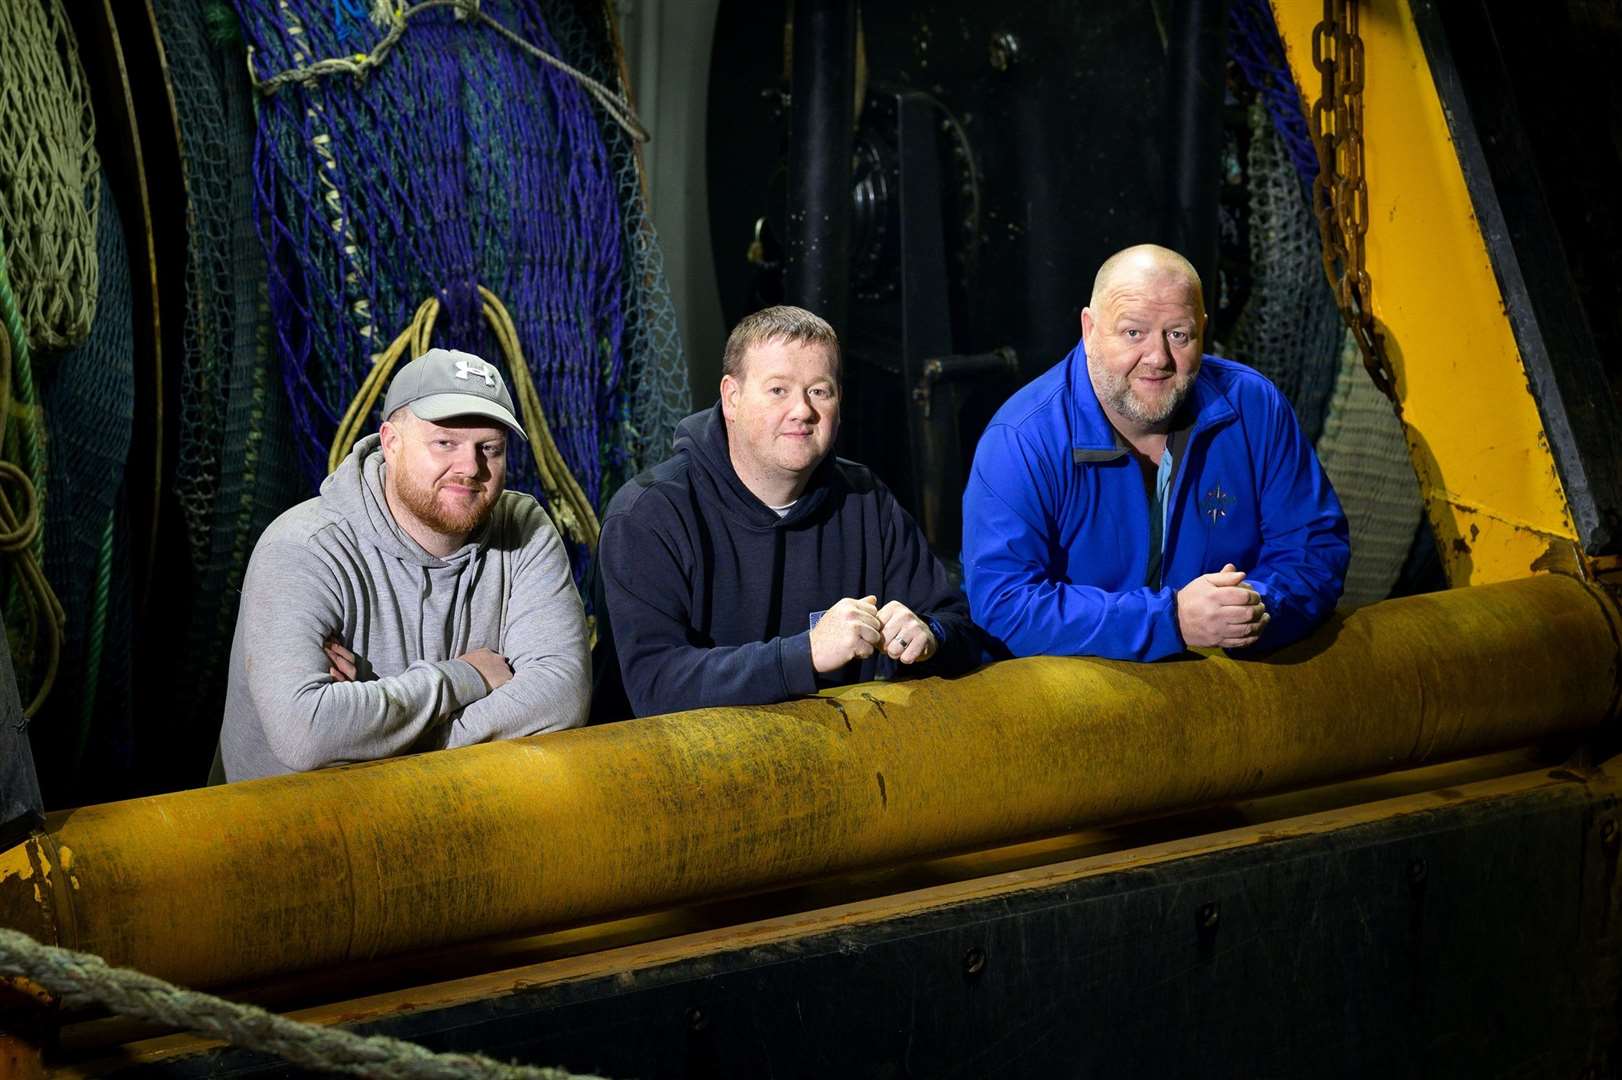 The Robertson family, who fish out of Fraserburgh, feature in the exhibition.